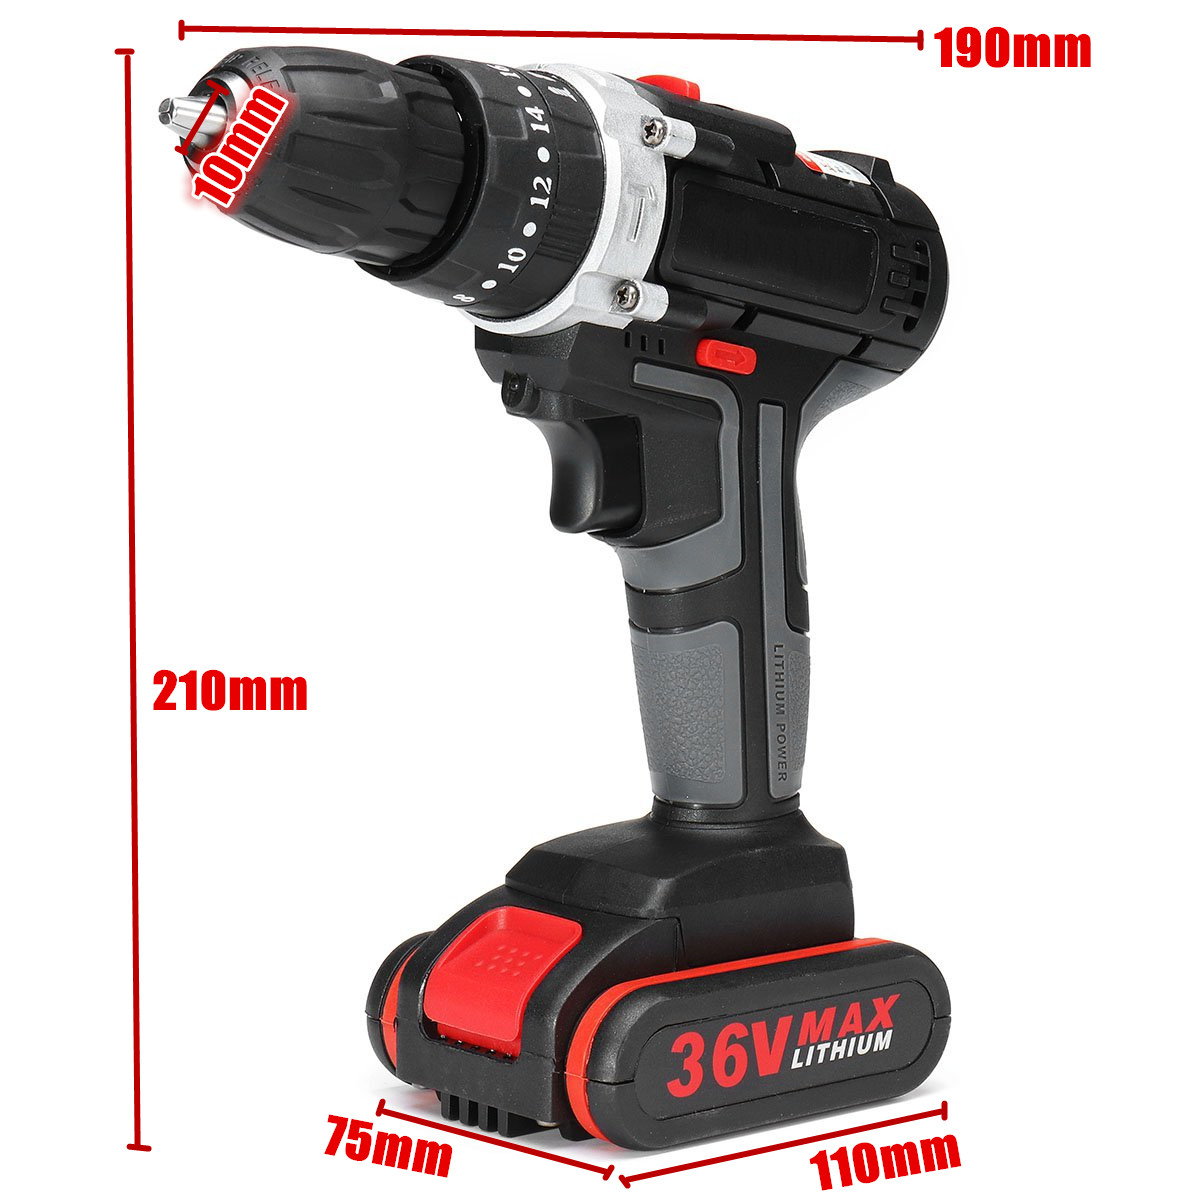 36V-Cordless-Lithium-Electric-Drill-Impact-Power-Drills-28Nm-3000mAh-183-Torque-Stage-Drill-Tools-1404353-5